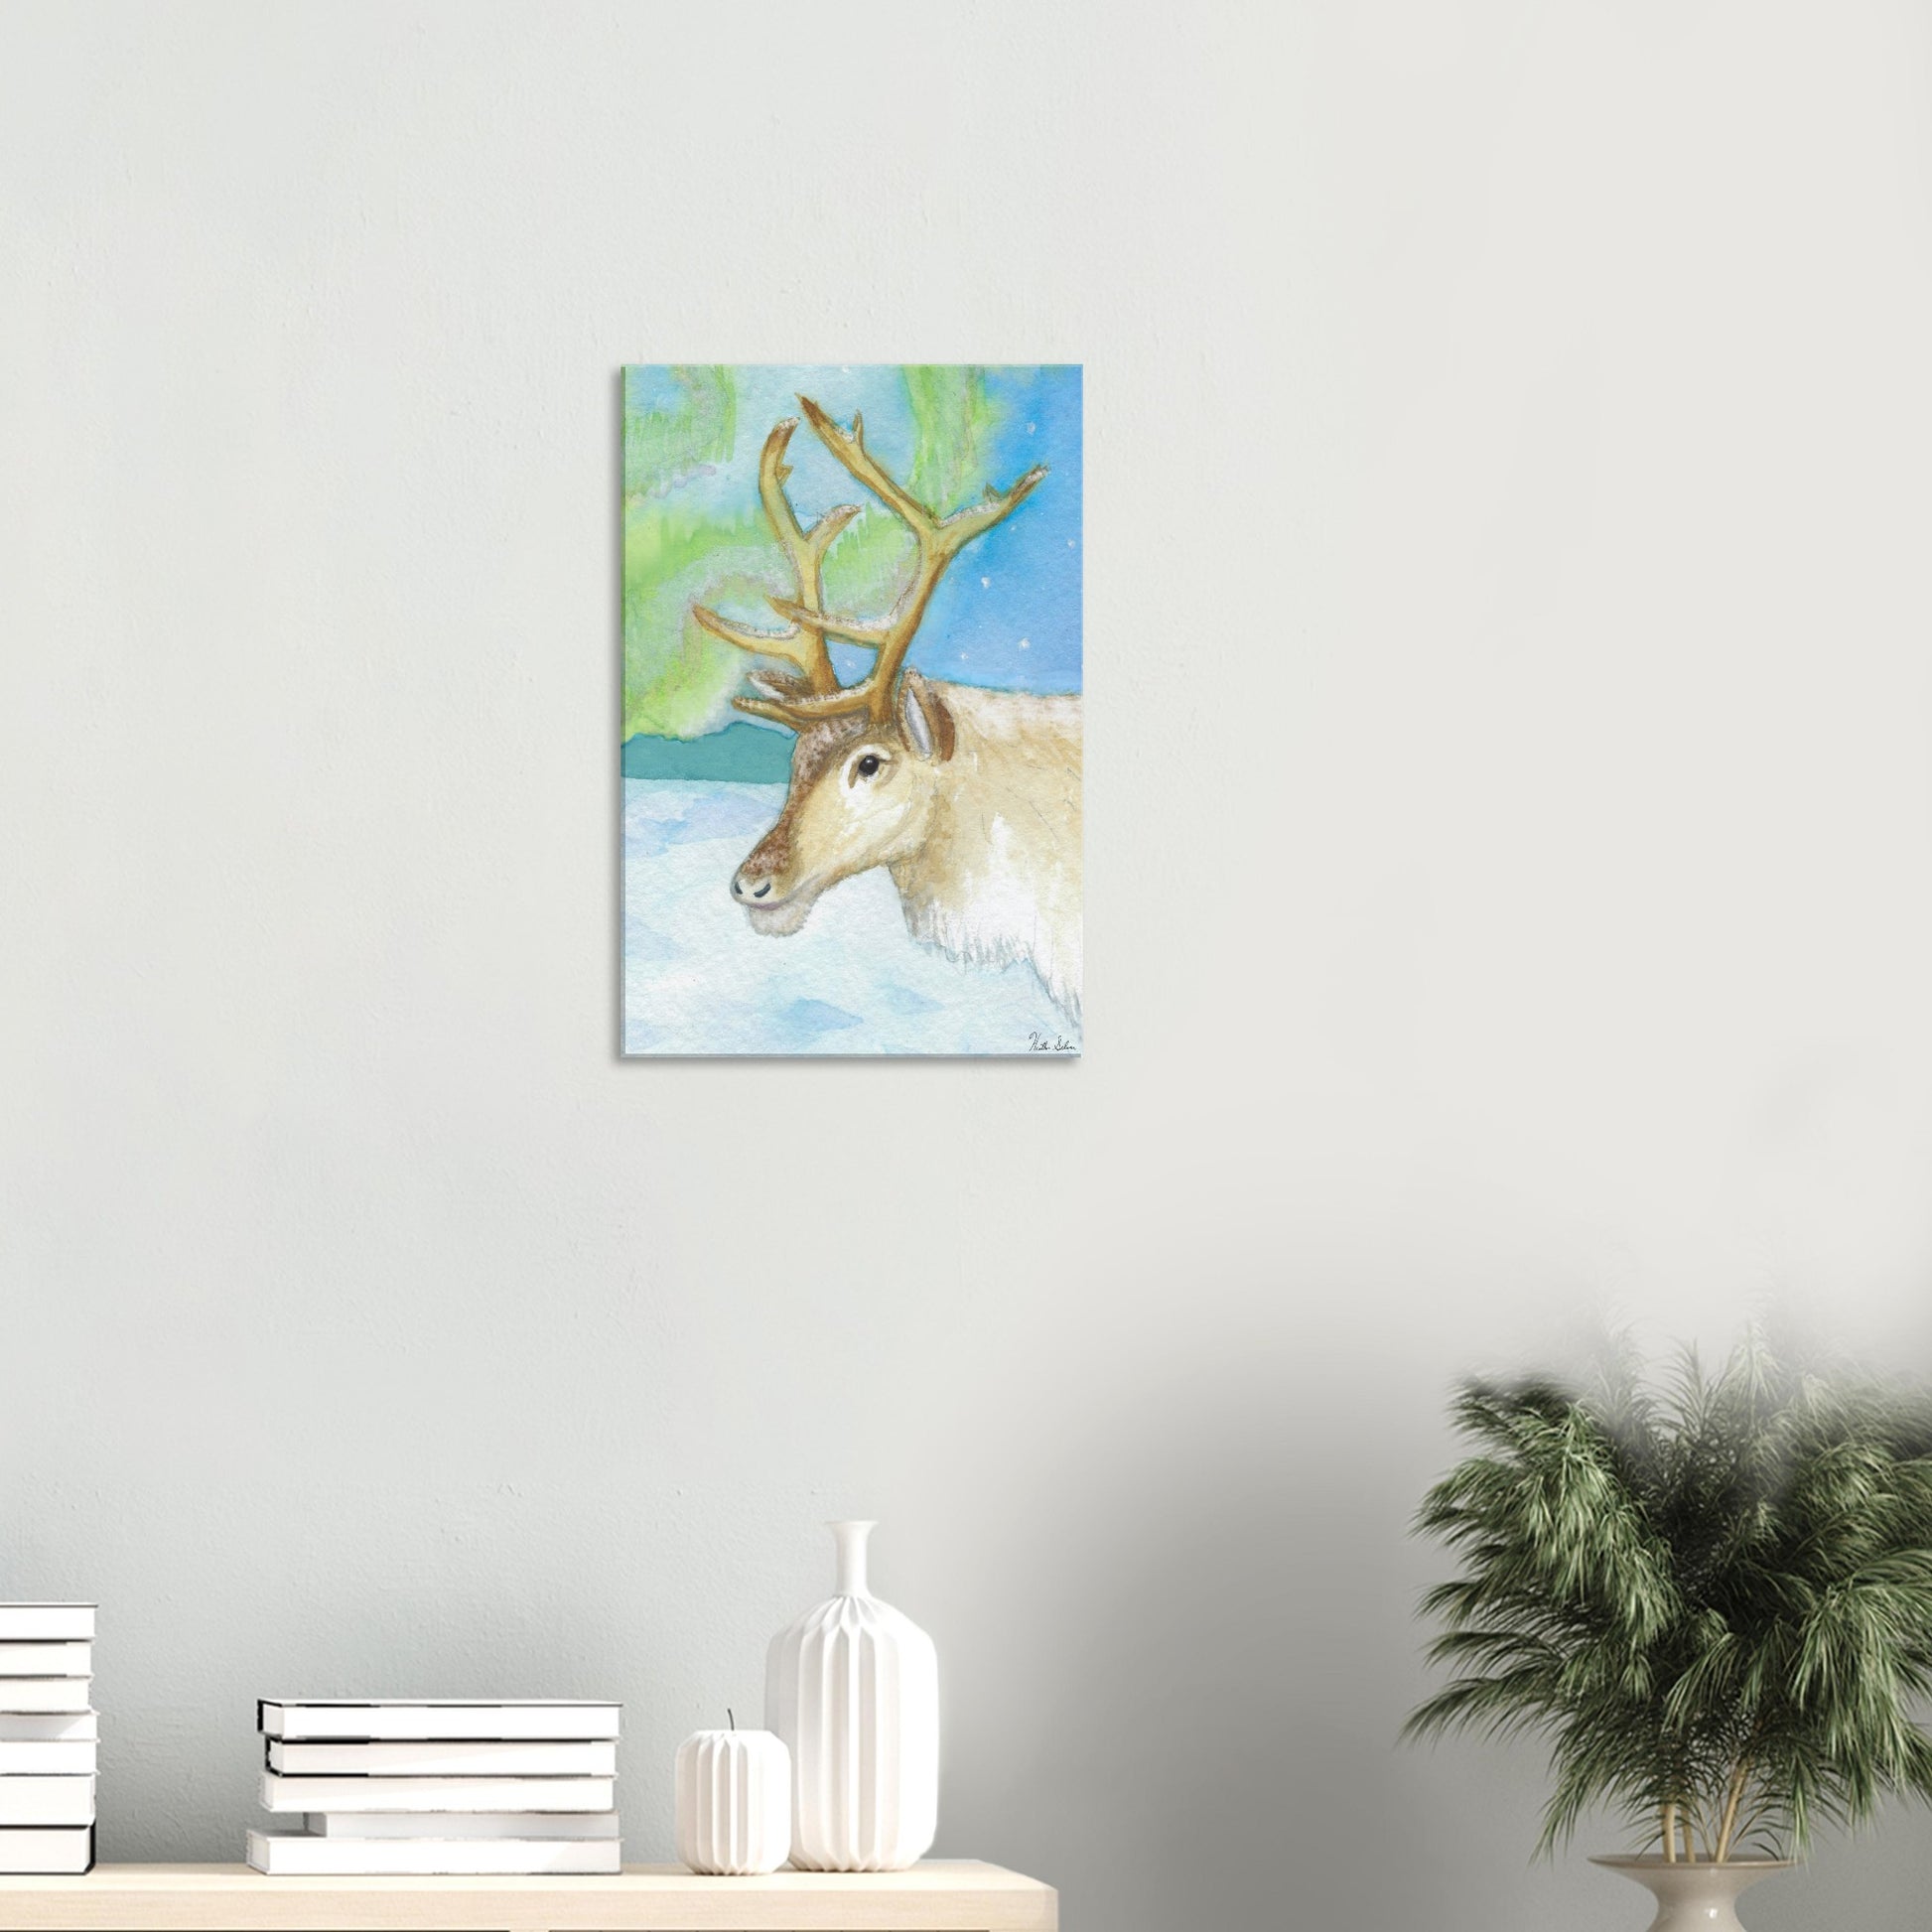 16 by 24 inch slim canvas print of Heather Silver's watercolor painting, northern lights reindeer. Shown on wall above dresser with books and potted plant.